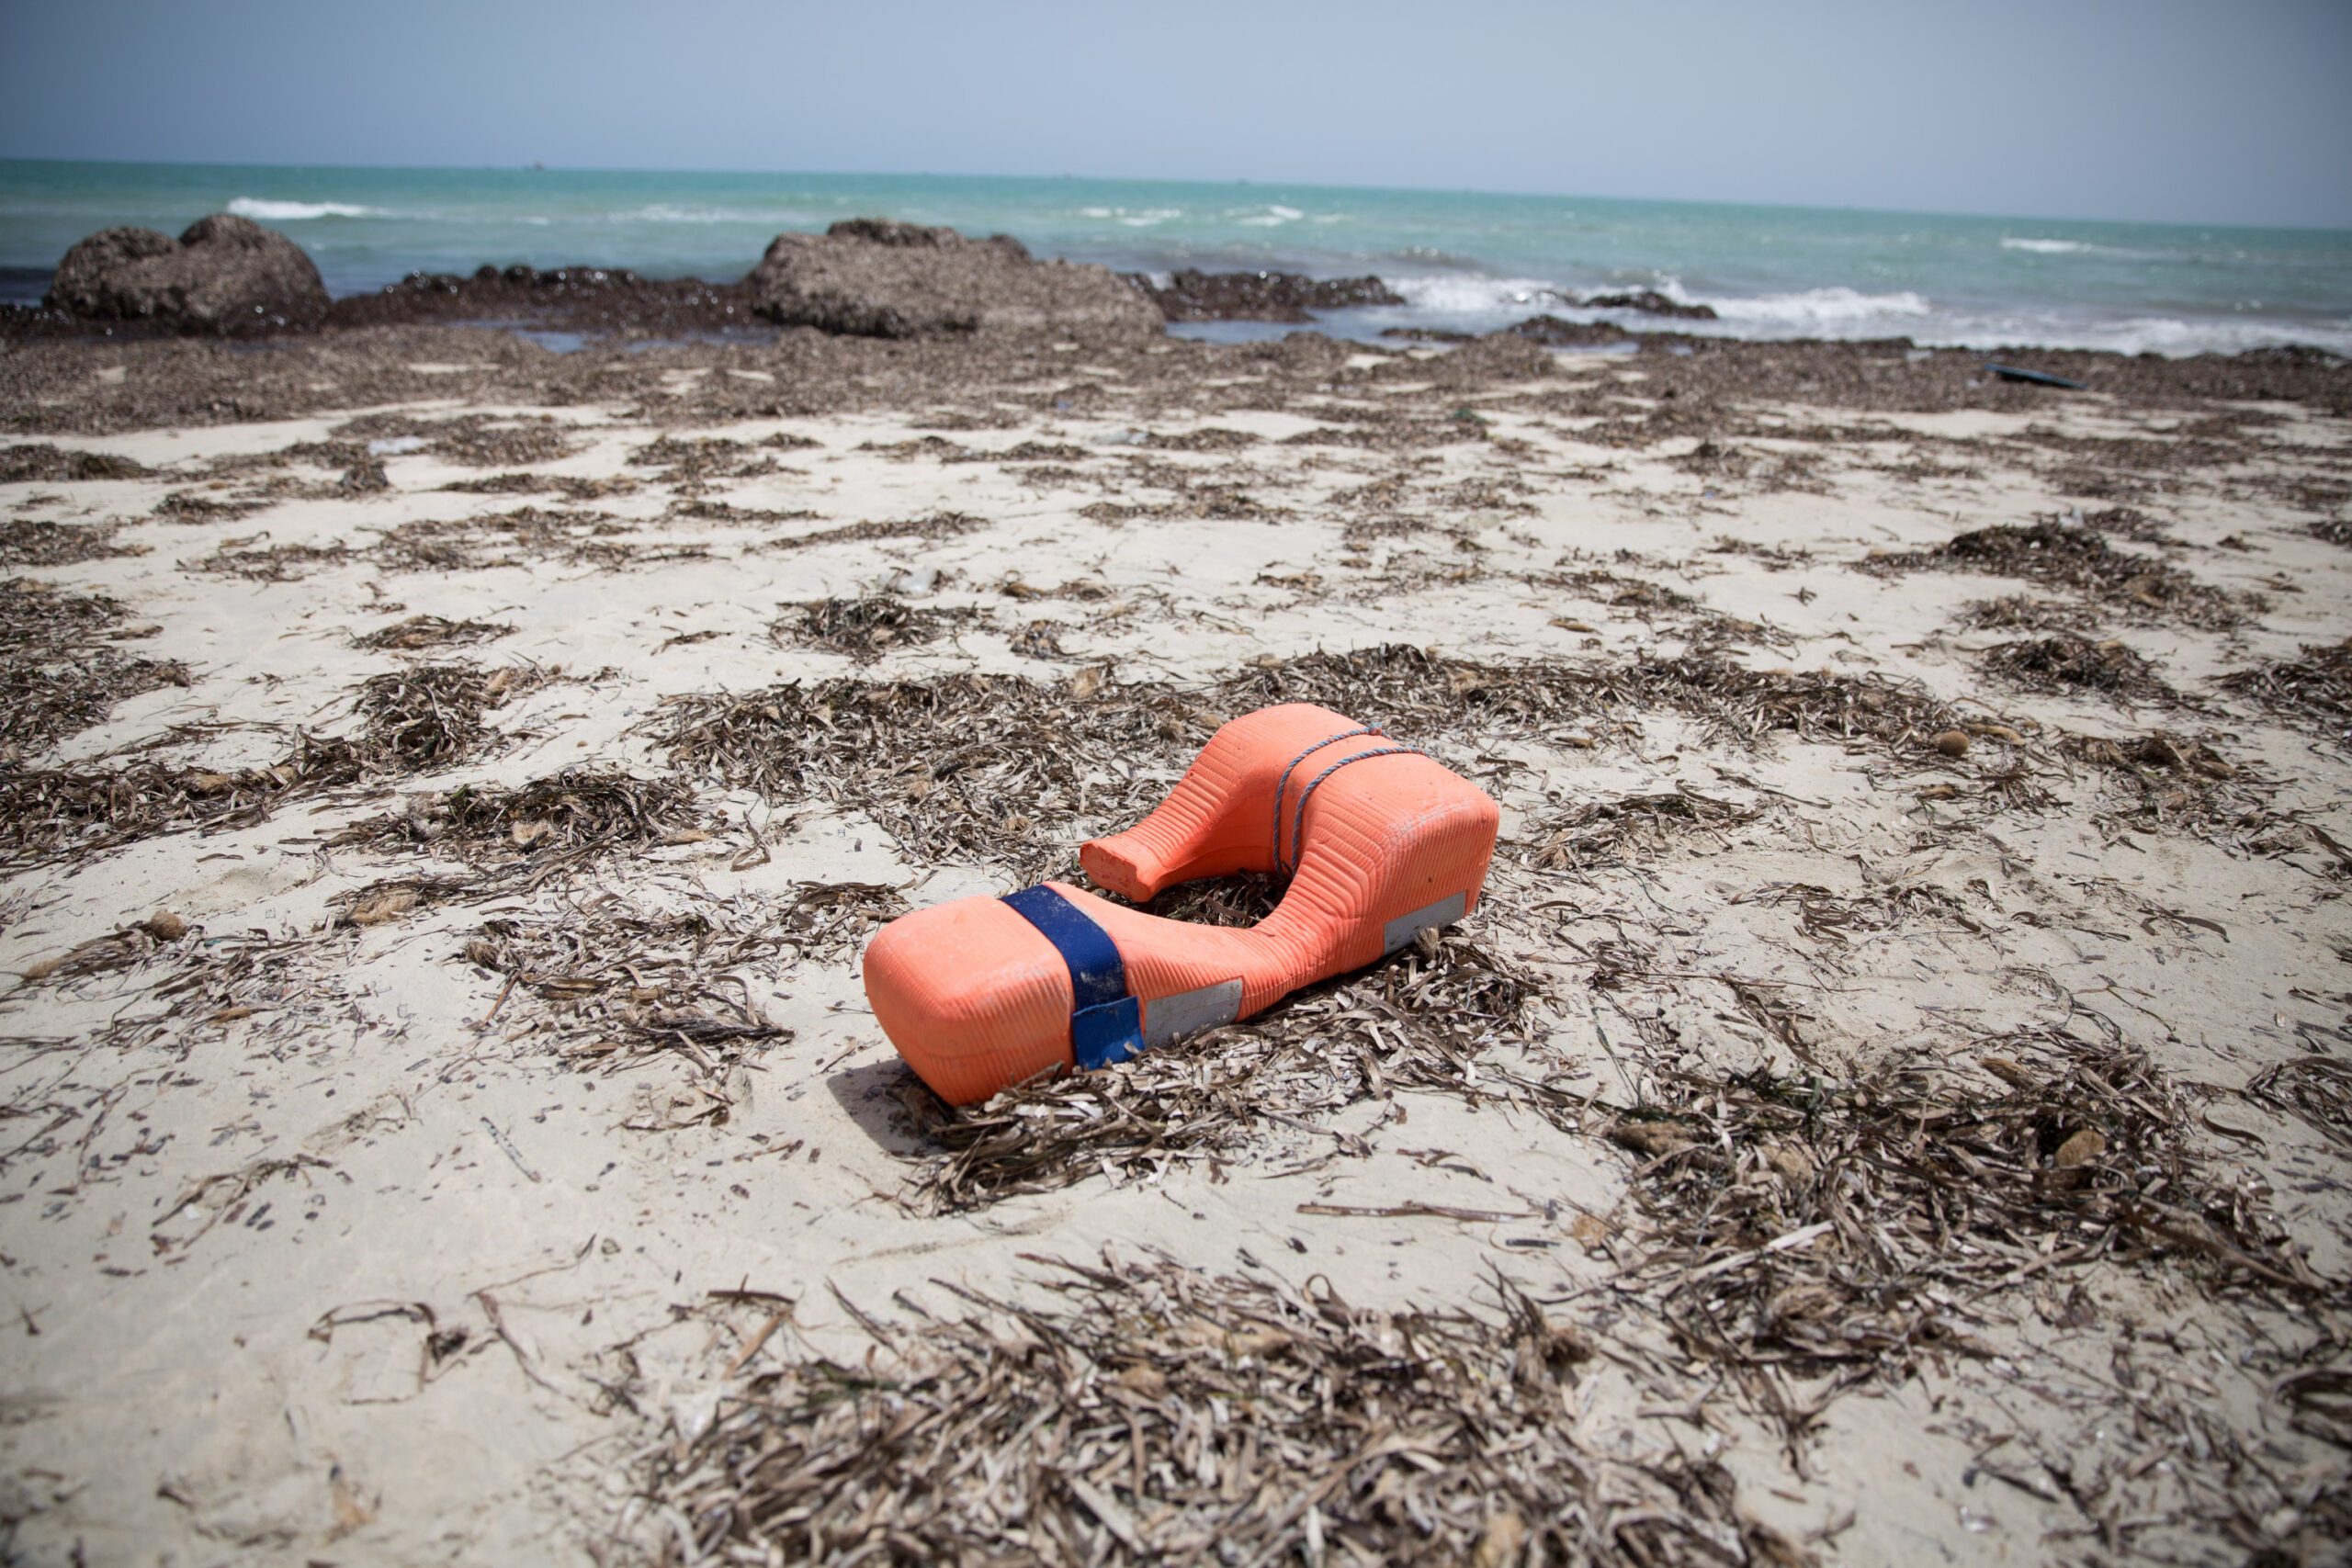 More migrant bodies wash up on Libyan beaches